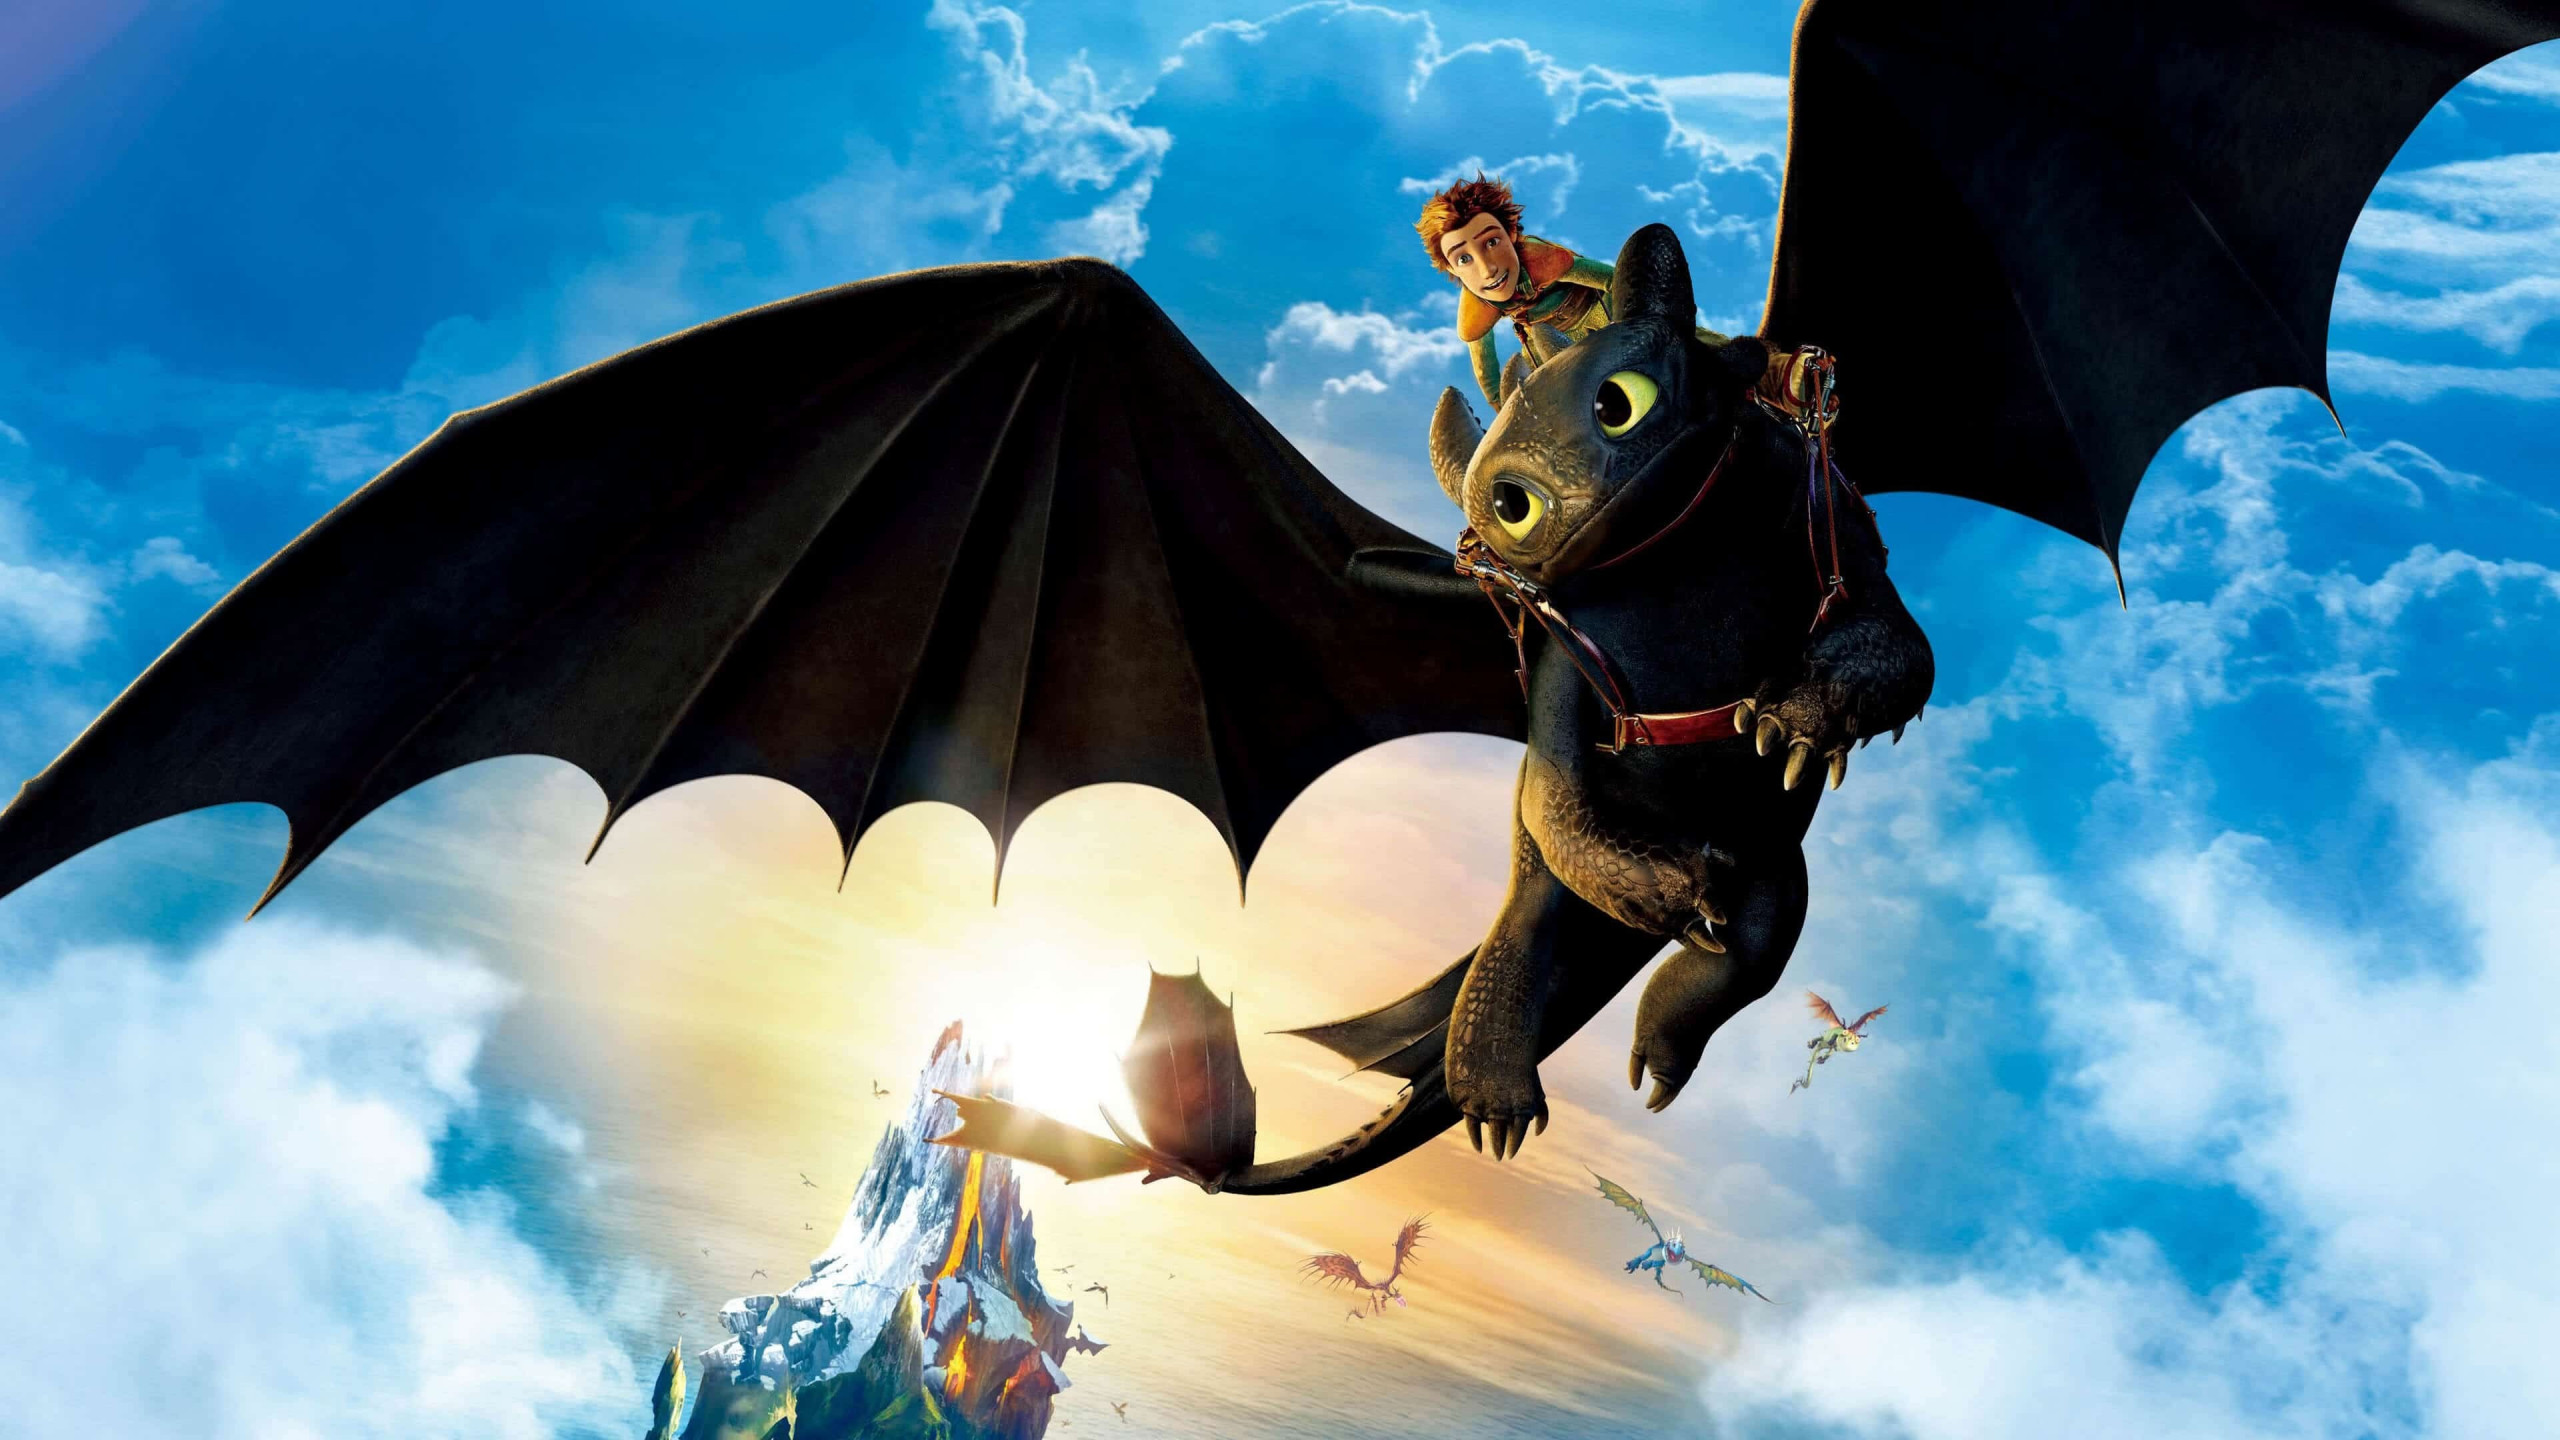 How to Train Your Dragon: The Hidden World wallpaper 2560x1440